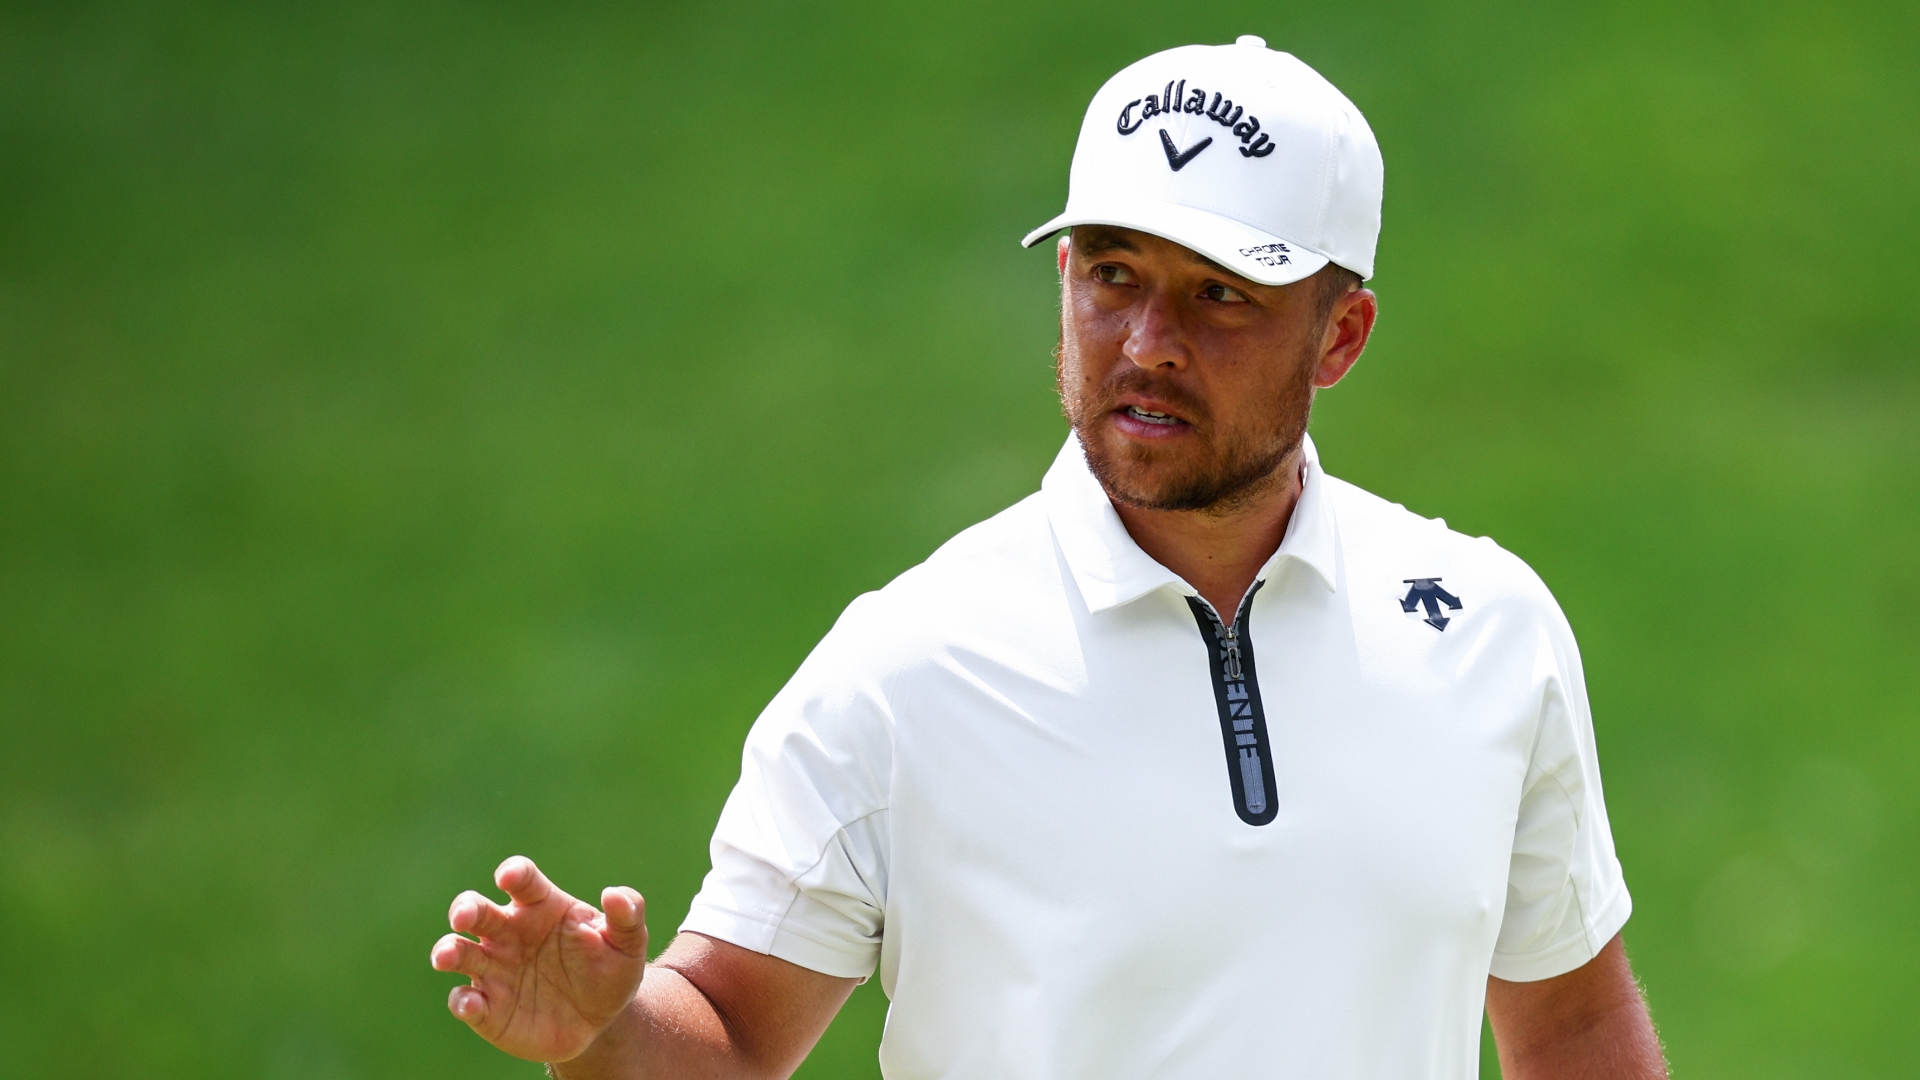 Xander Schauffele extends his lead with a birdie on 13